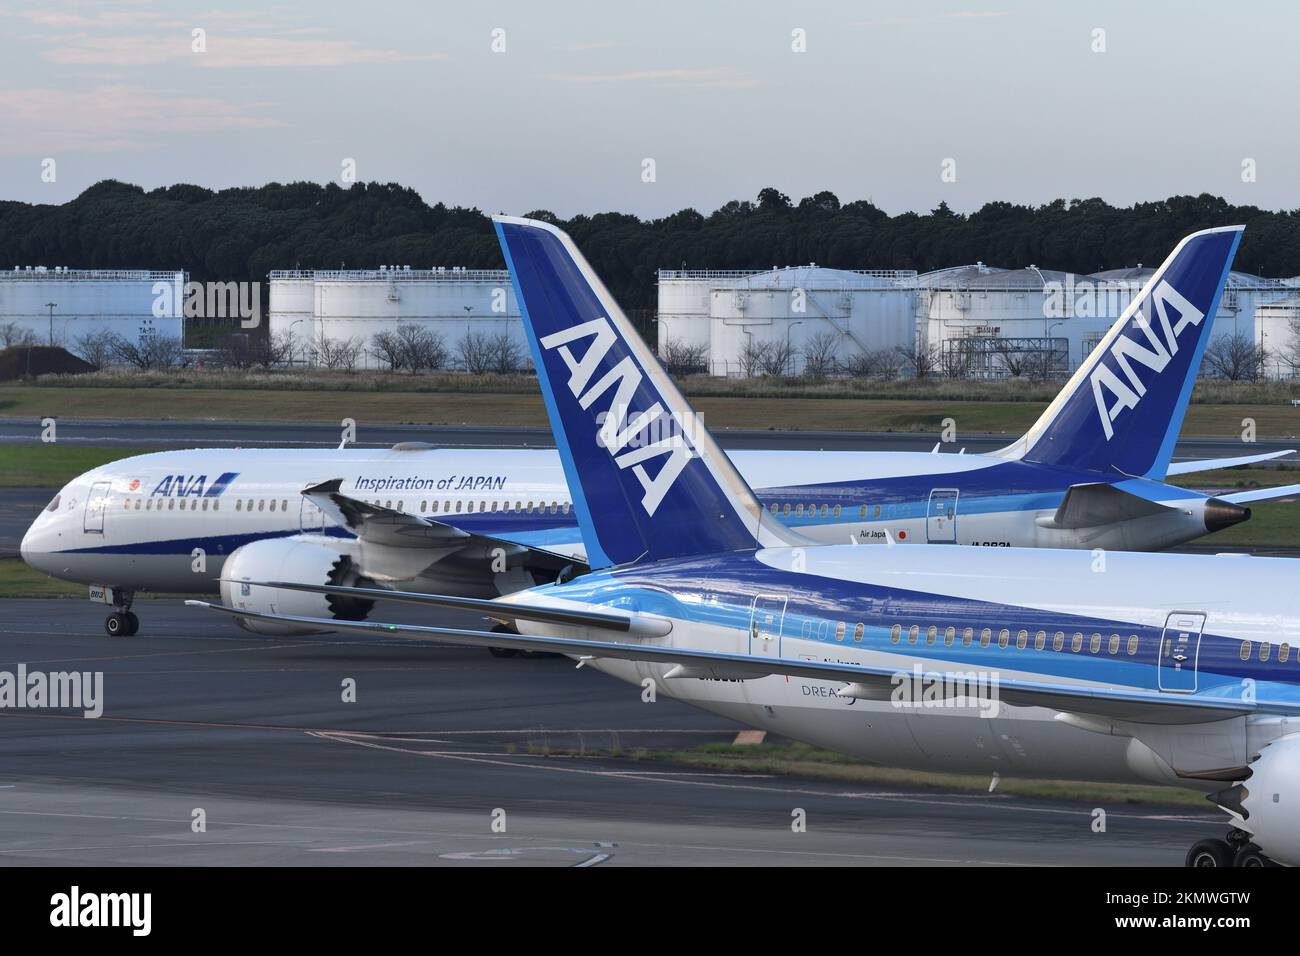 Chiba Prefecture, Japan - October 29, 2021: All Nippon Airways (ANA) passenger planes. Stock Photo